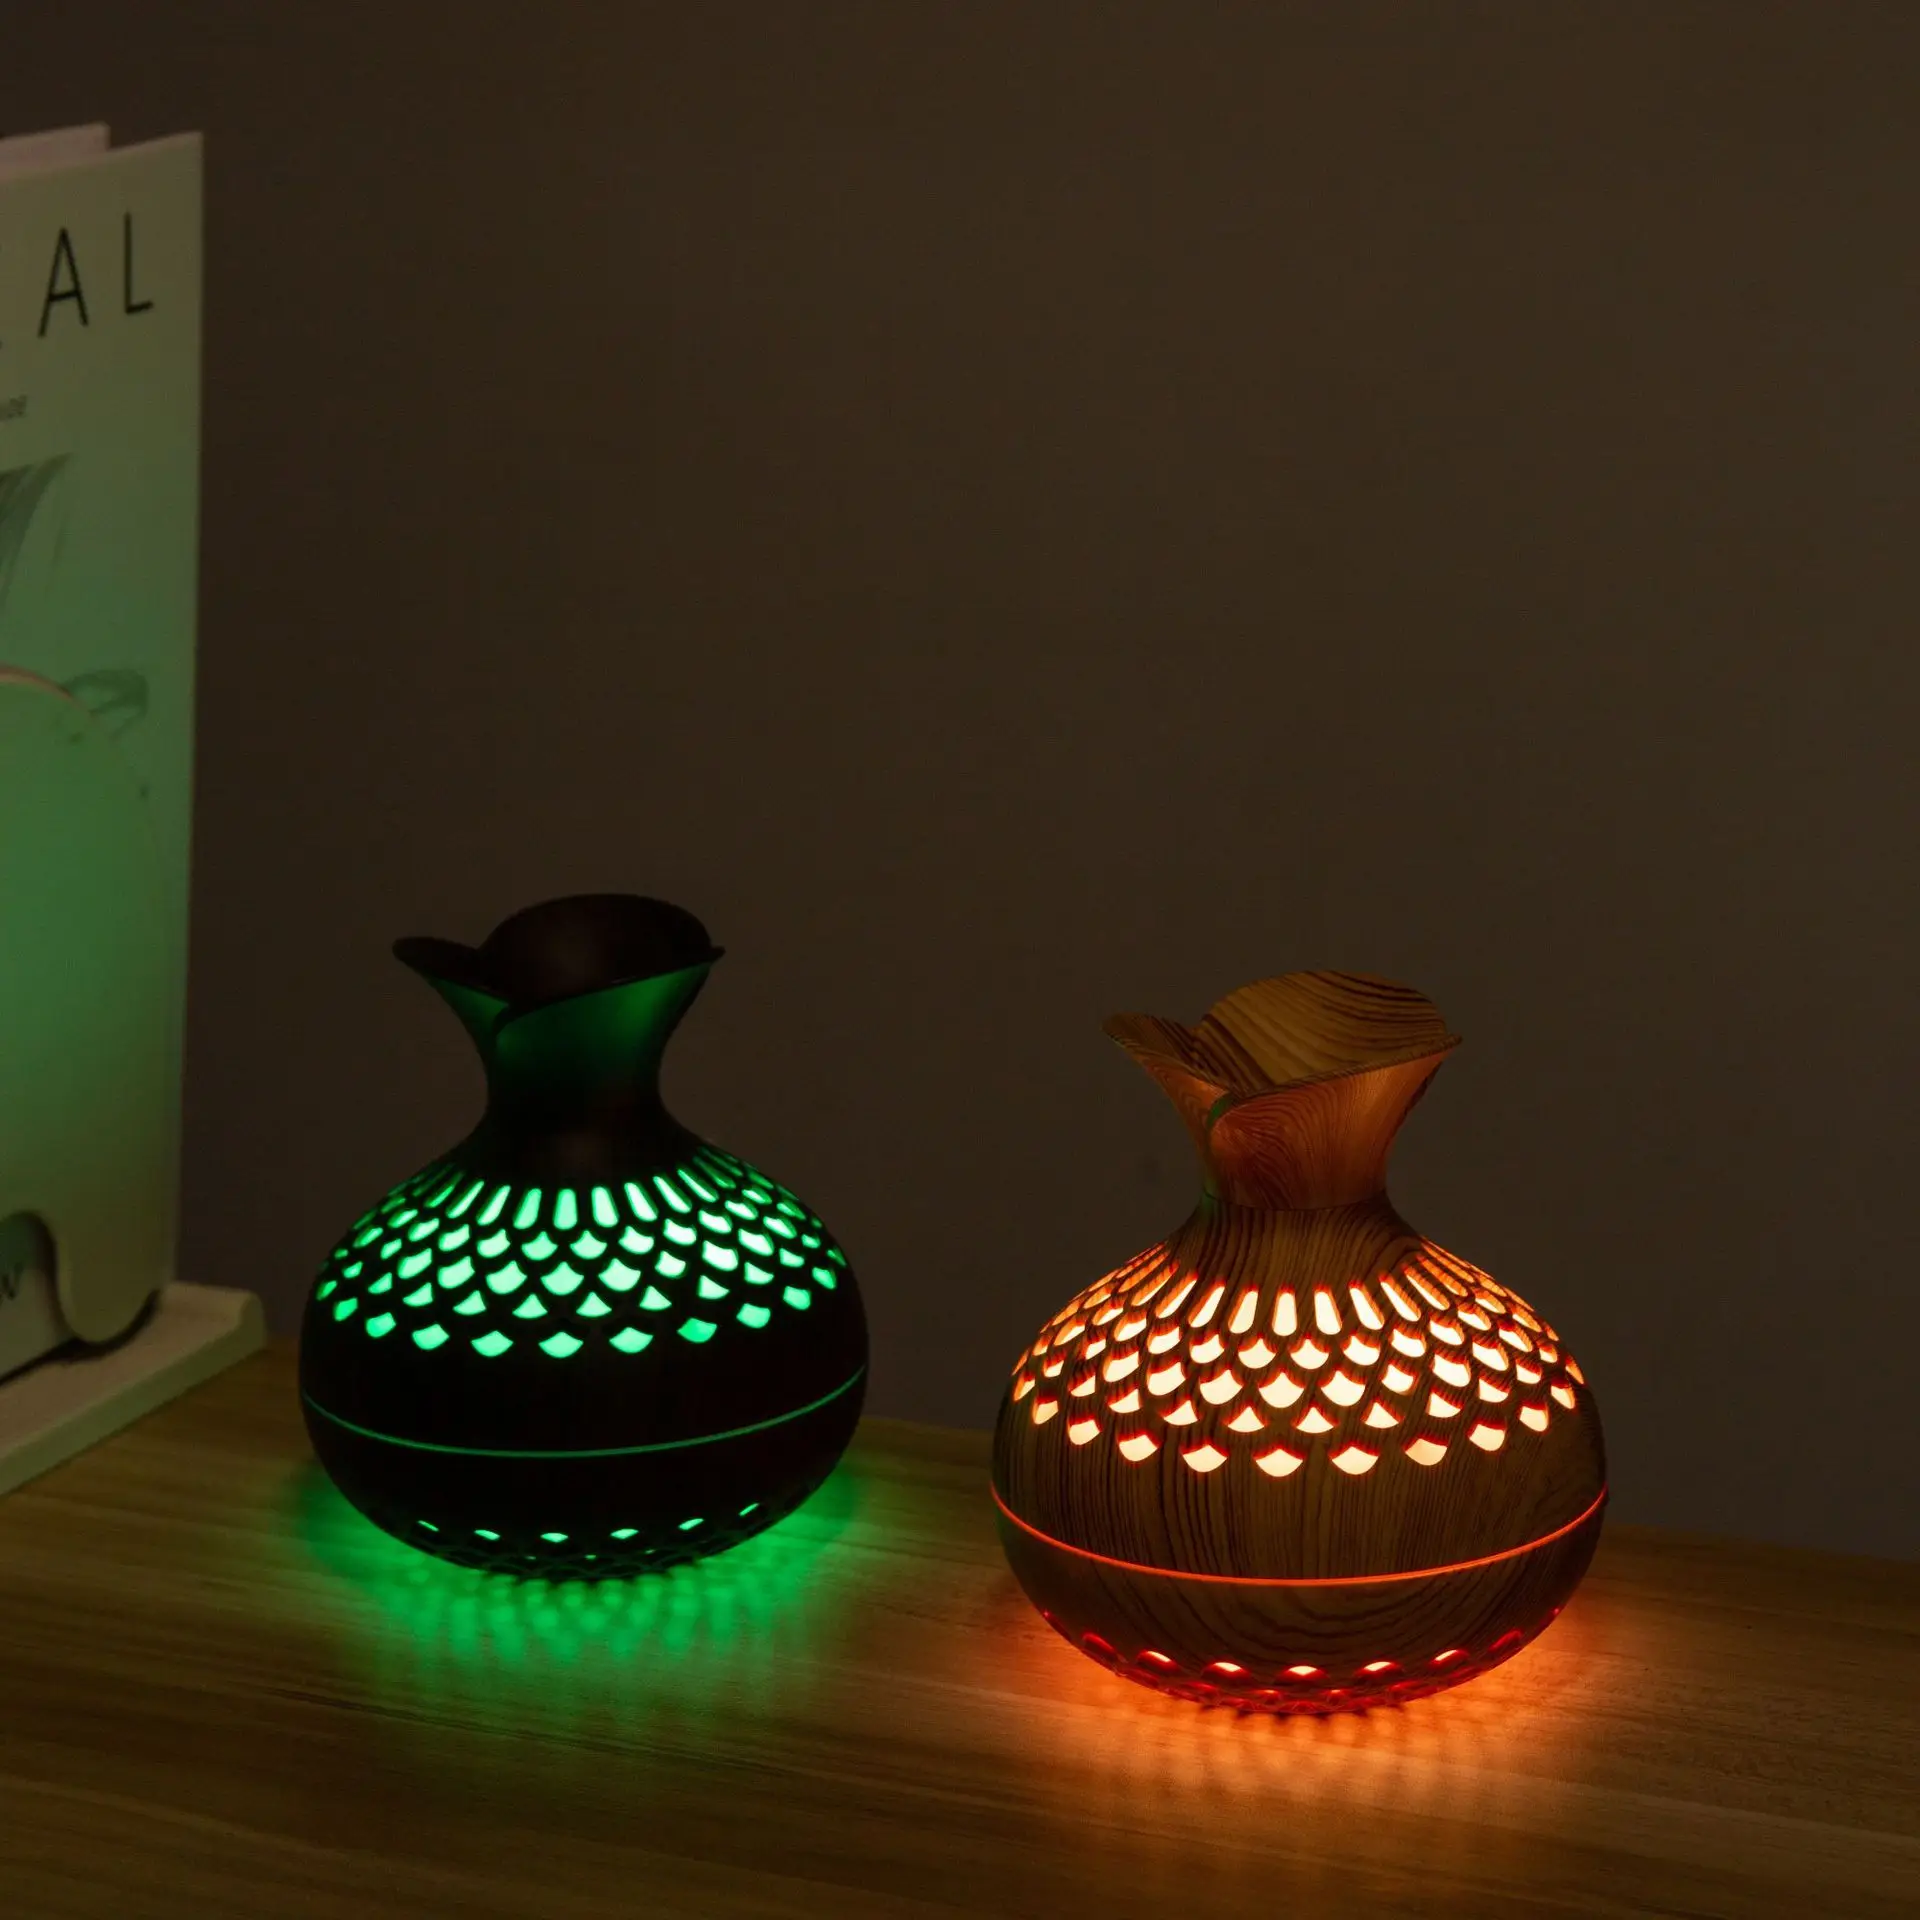 Portable Humidifier 7 Color Led Night Light USB Wood Grain Ultrasonic Mist Air Humidifier For Home Office